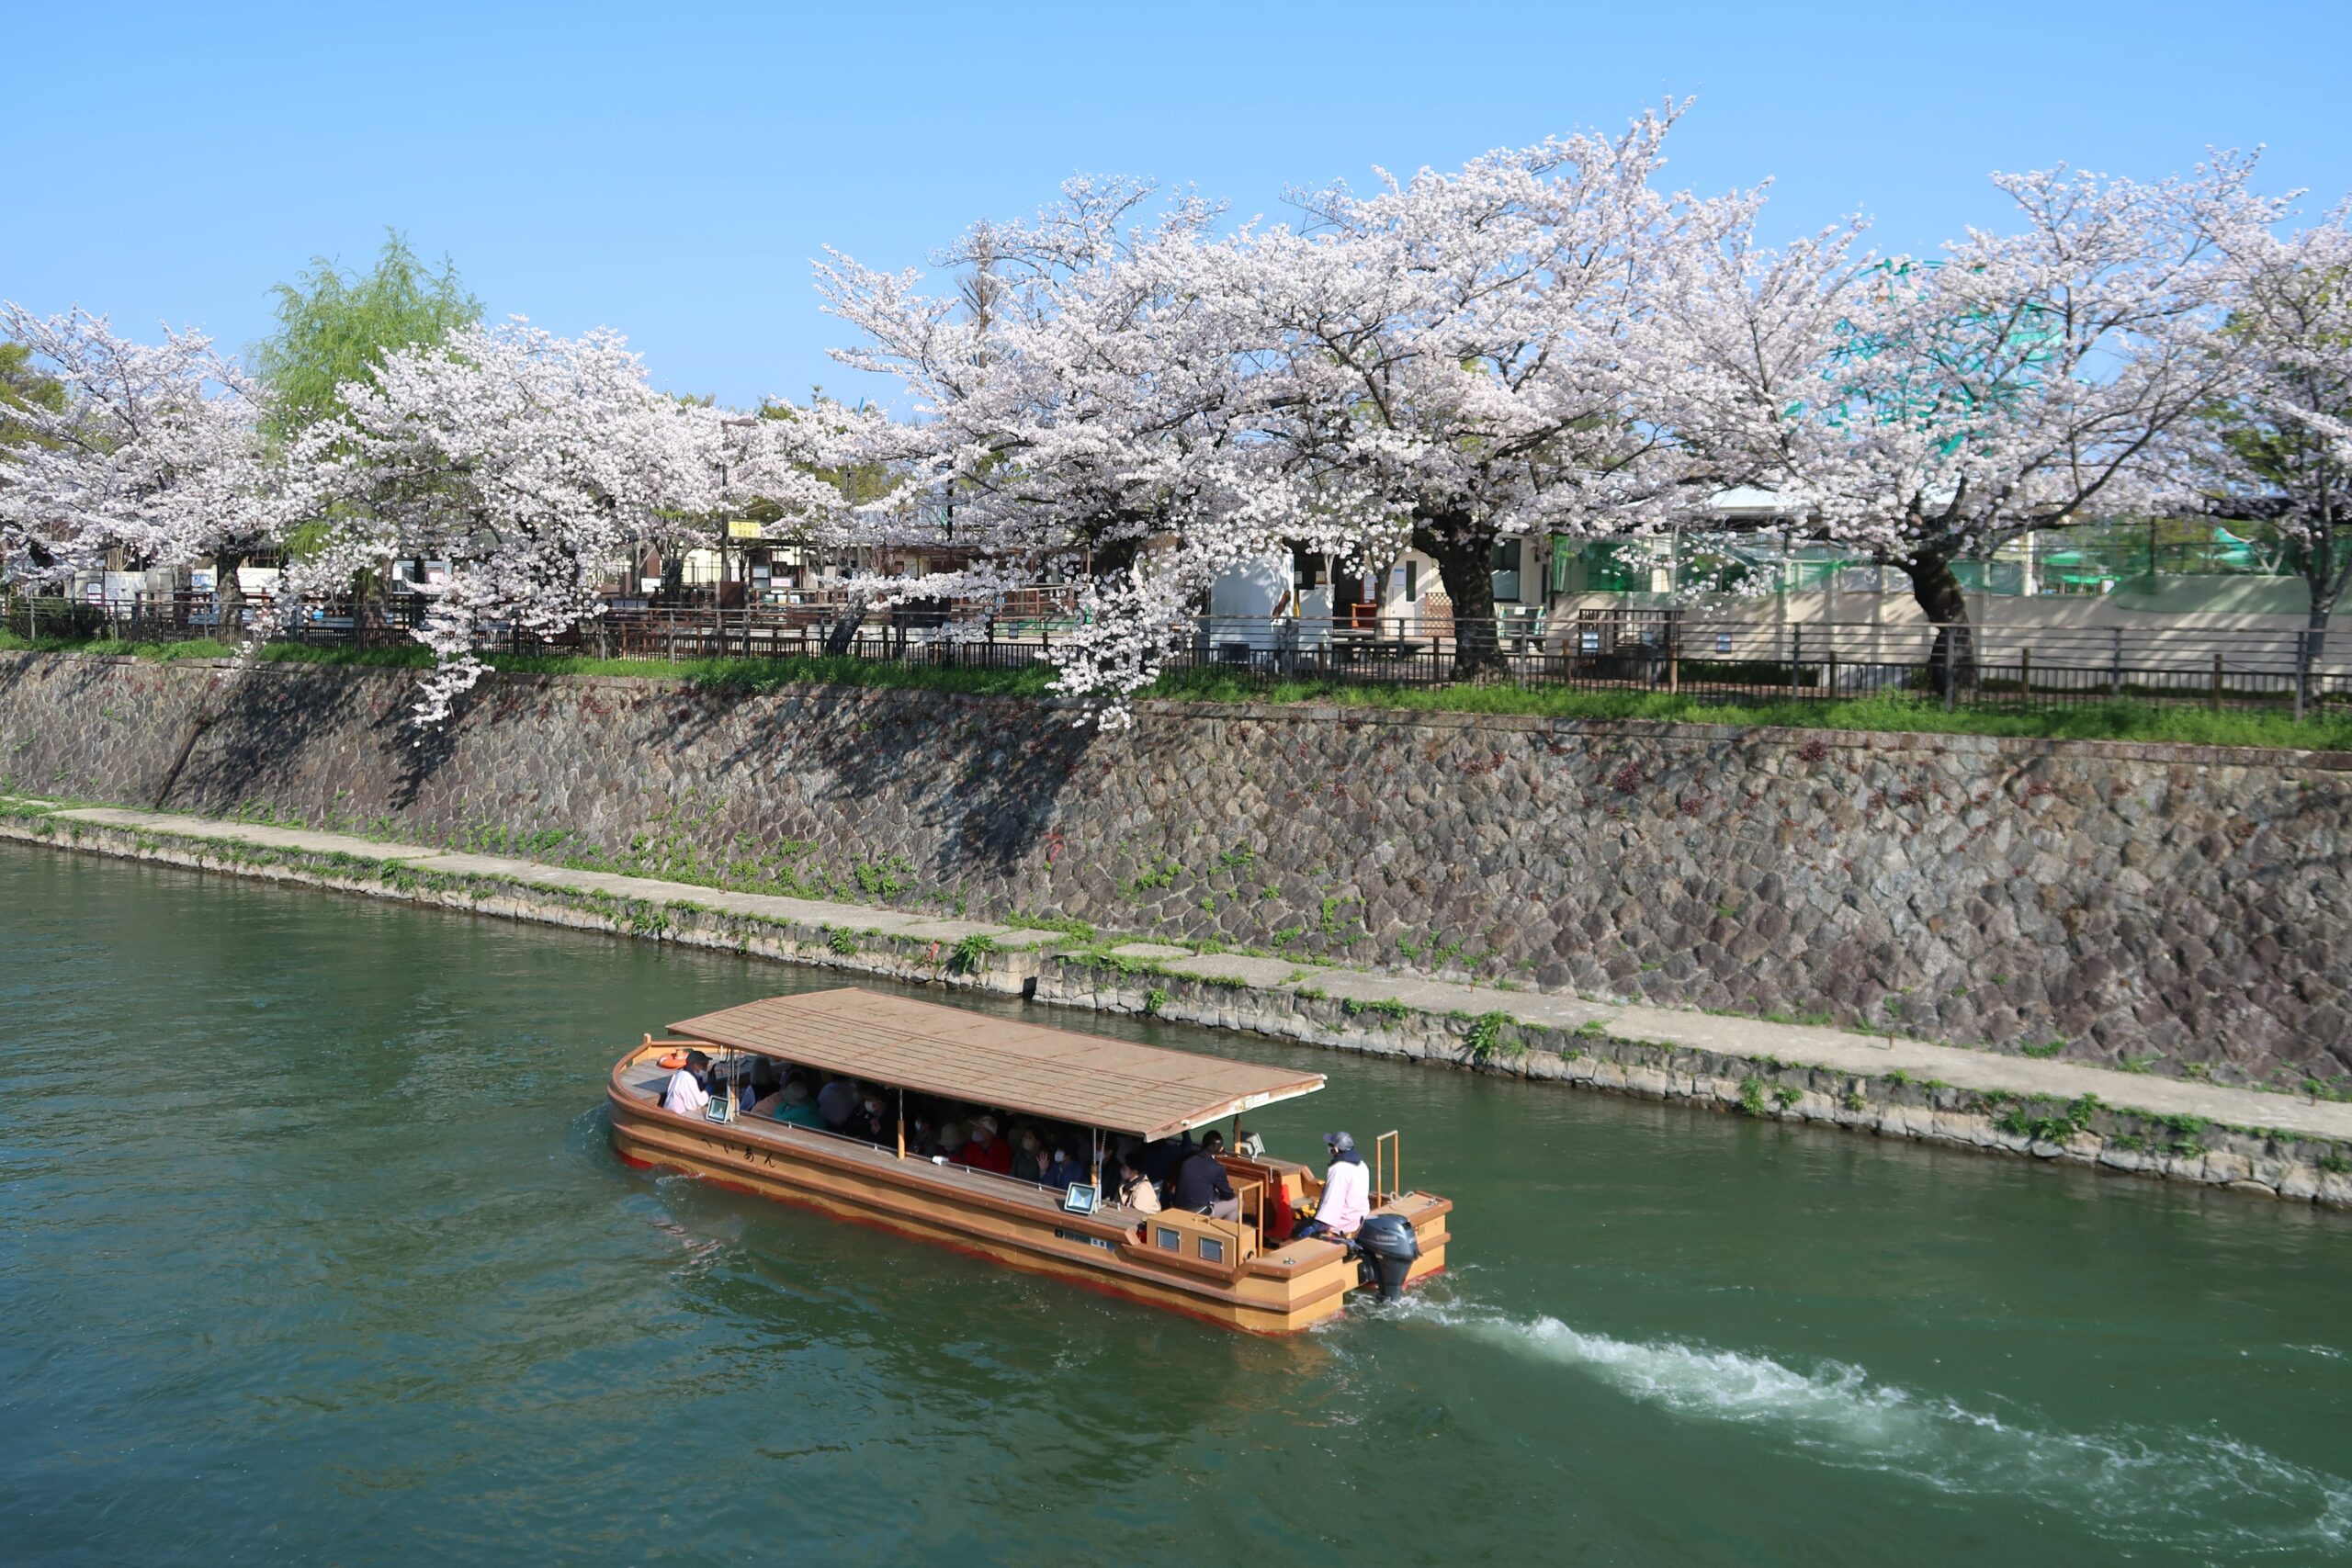 kyoto nanzenji boat pier river boat tour of the cherry blossoms in japan things to see and do kyoto